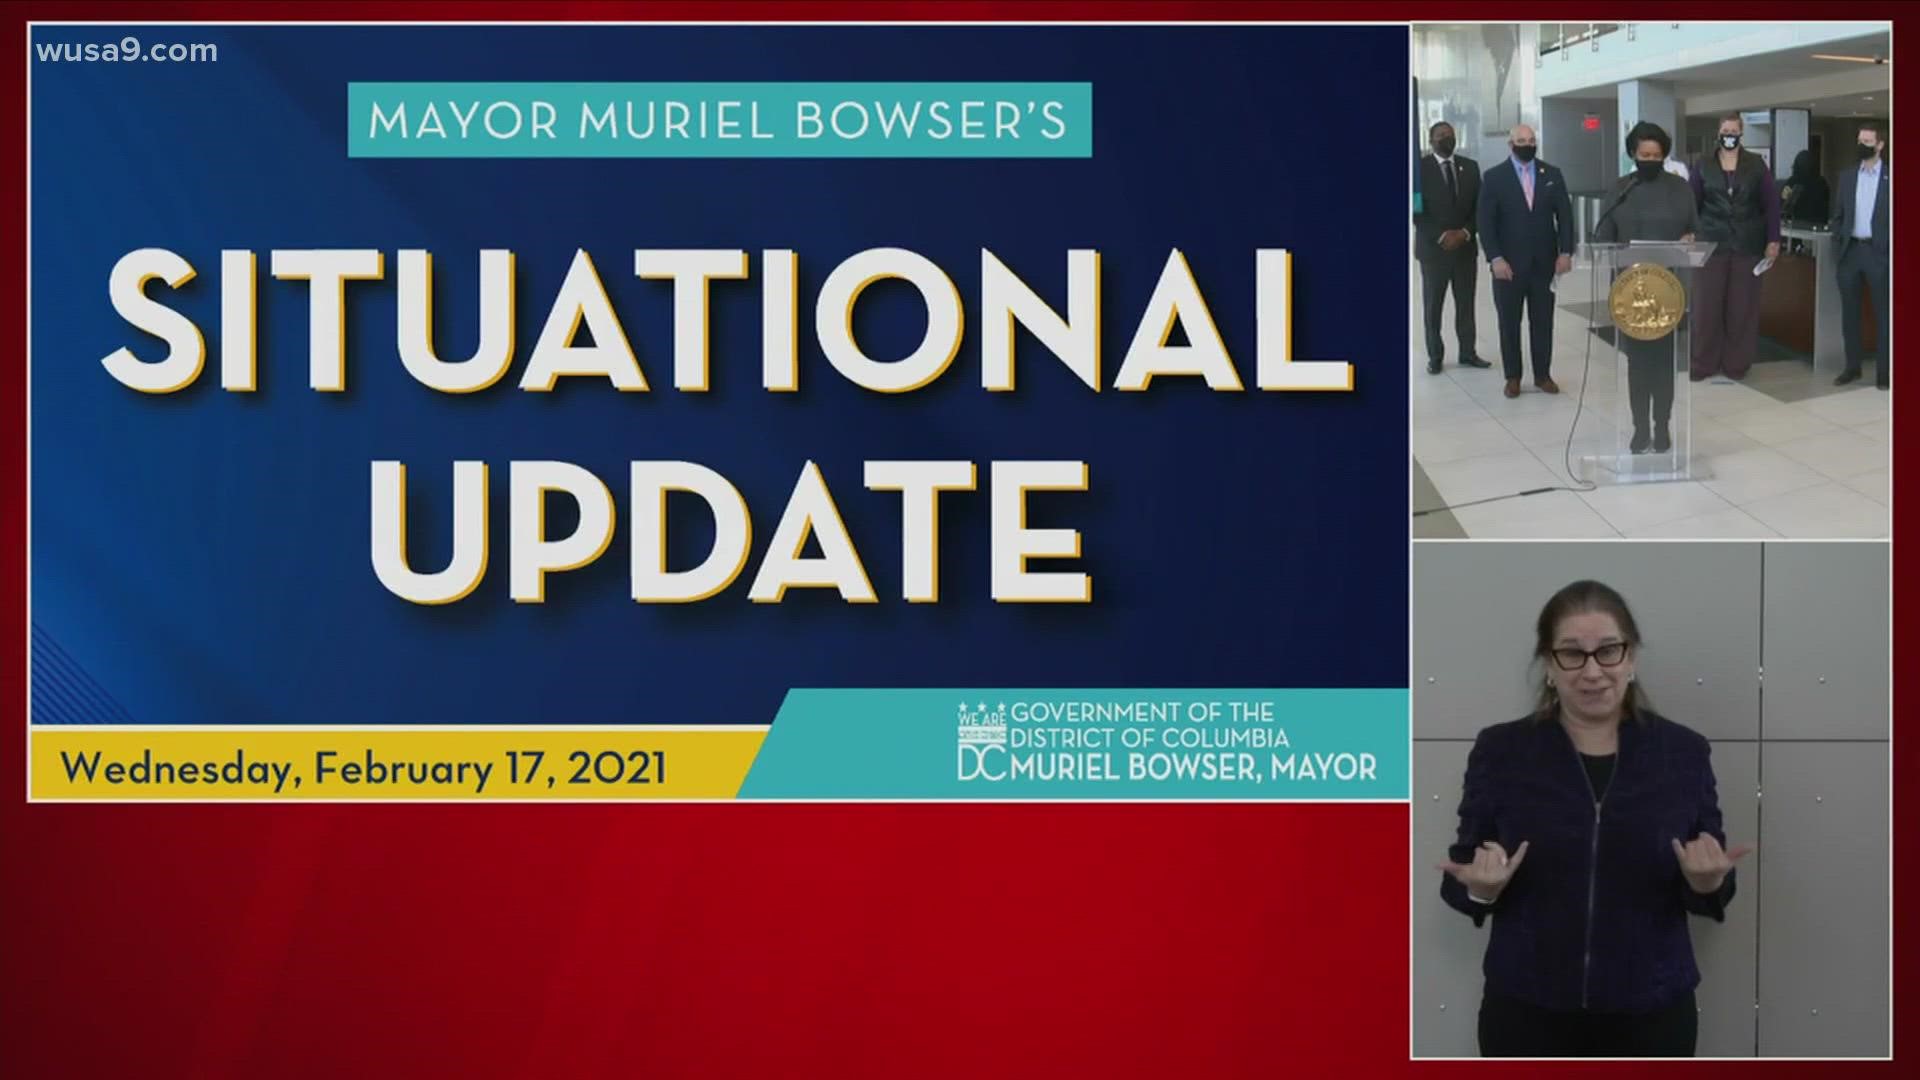 D.C. Mayor Muriel Bowser signs executive order Wednesday to declare gun violence a public health crisis following the rise in shootings in the city.